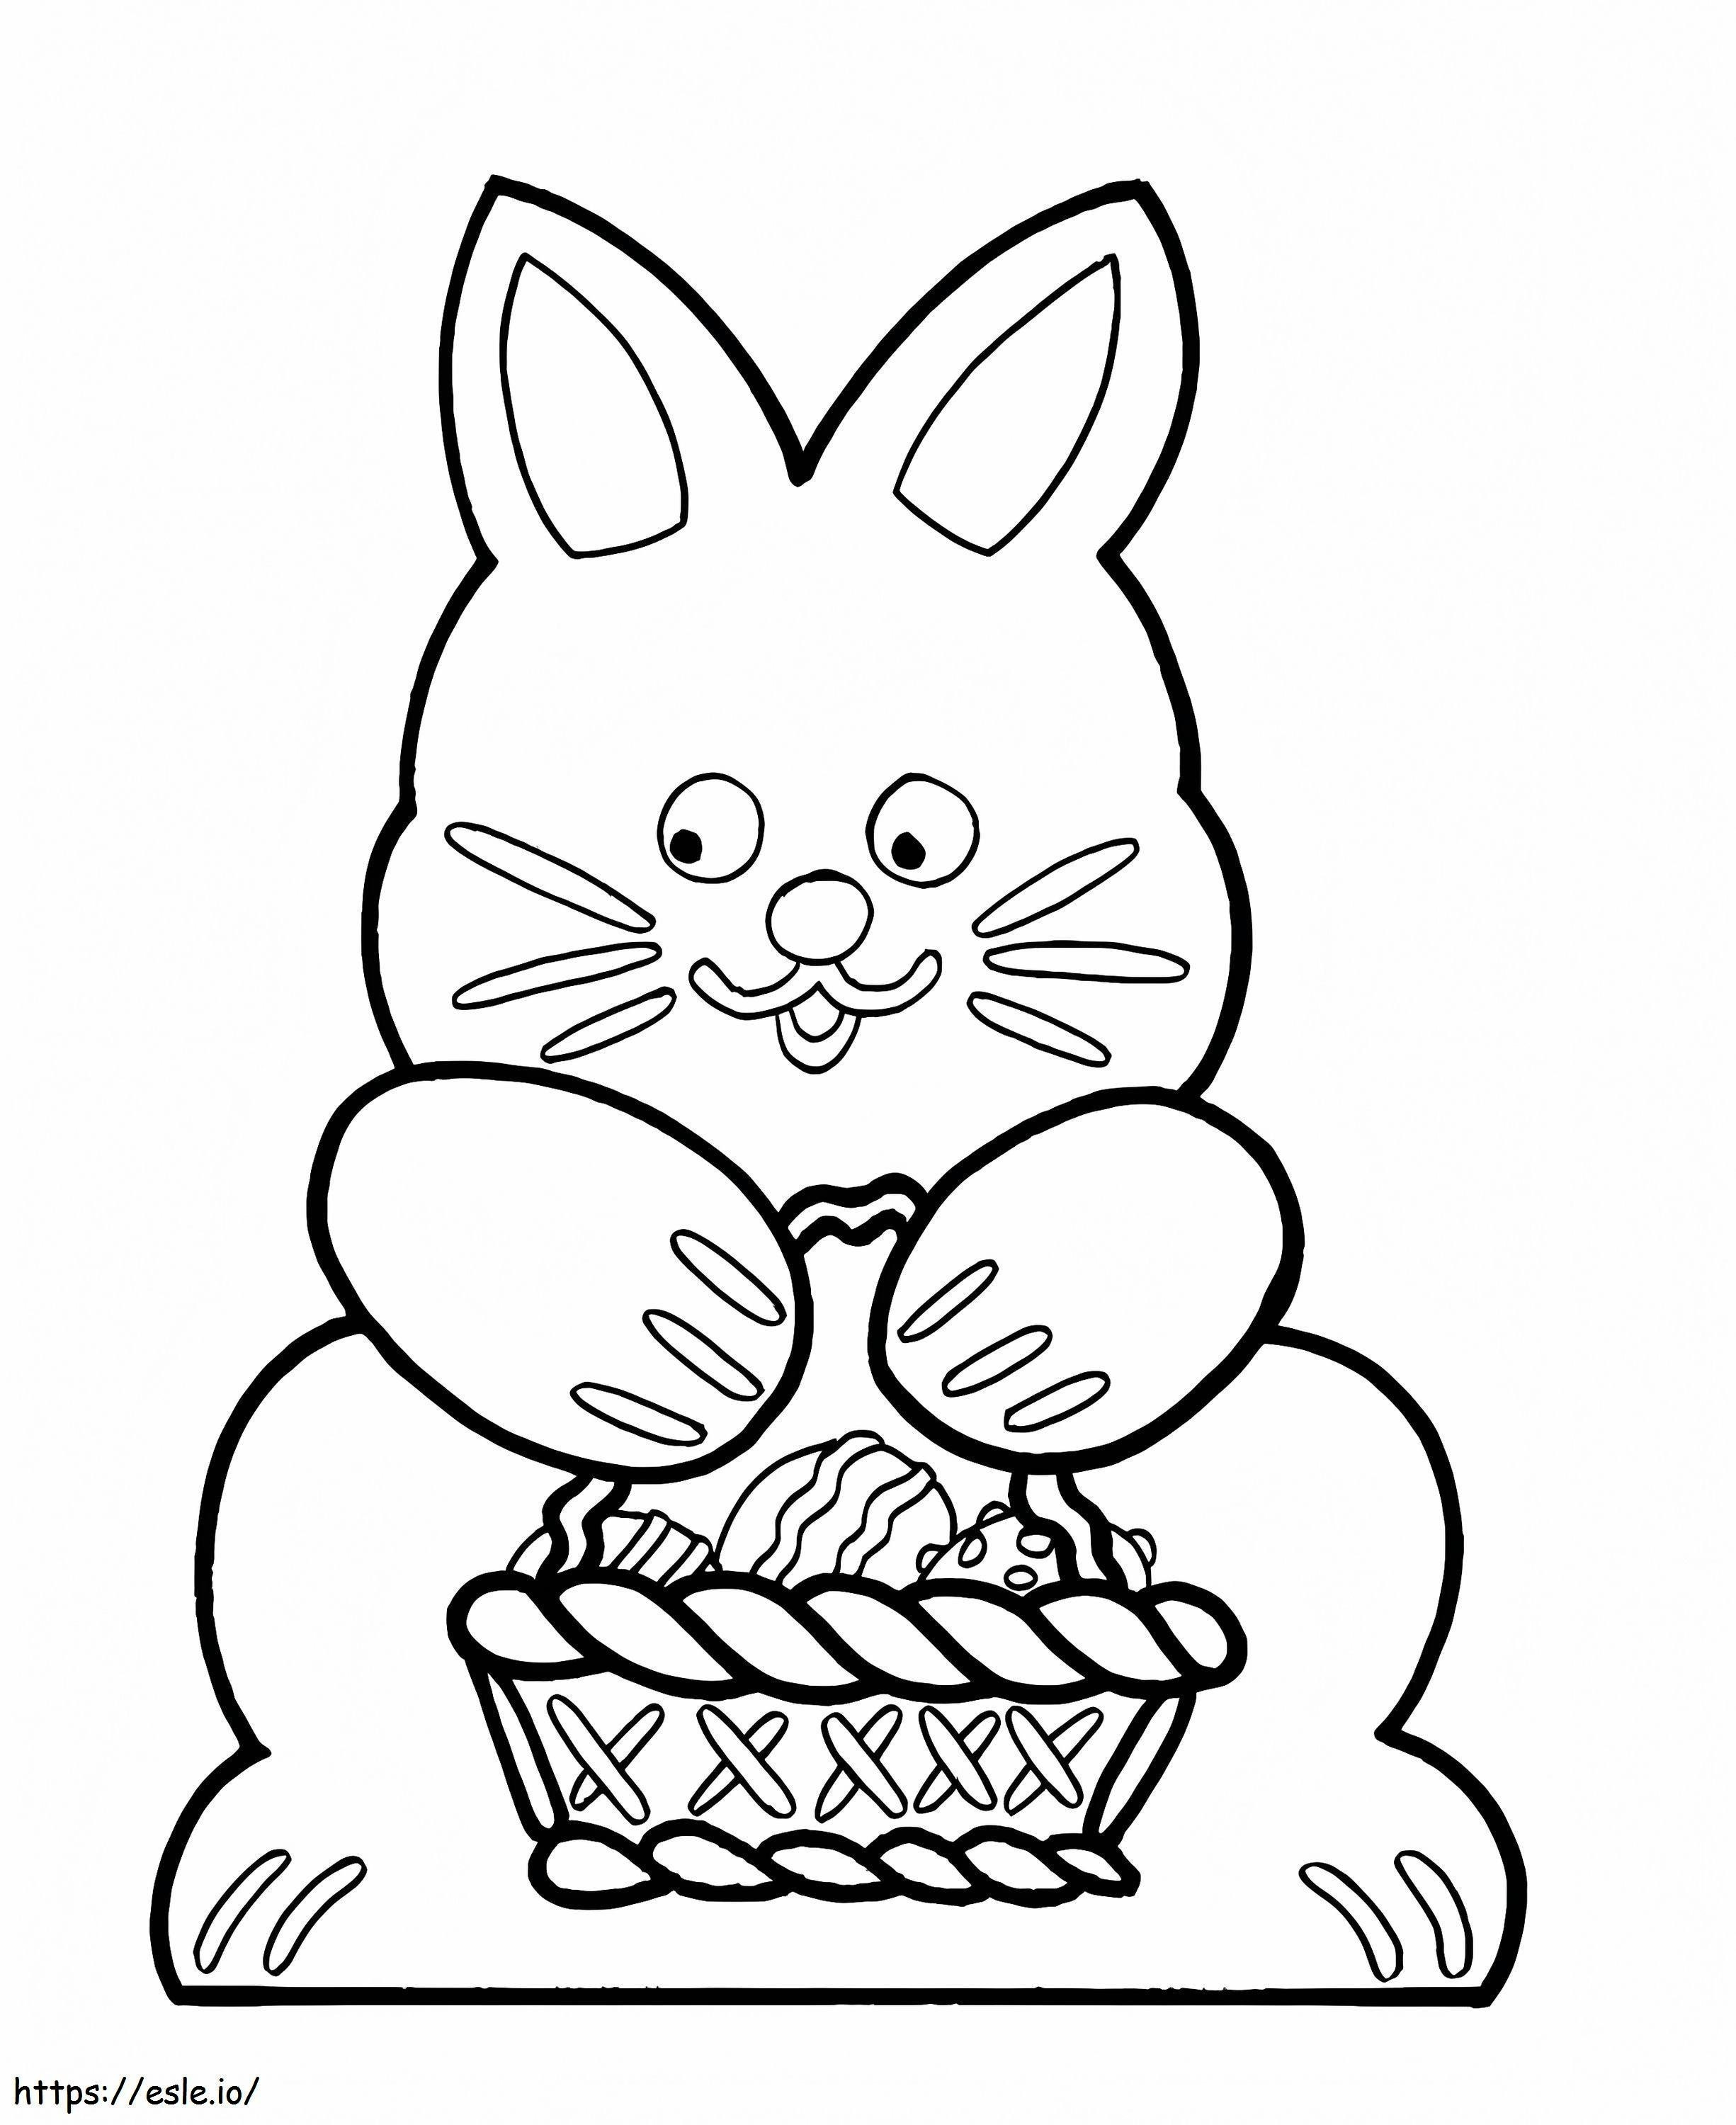 Rabbit Holding Easter Basket coloring page